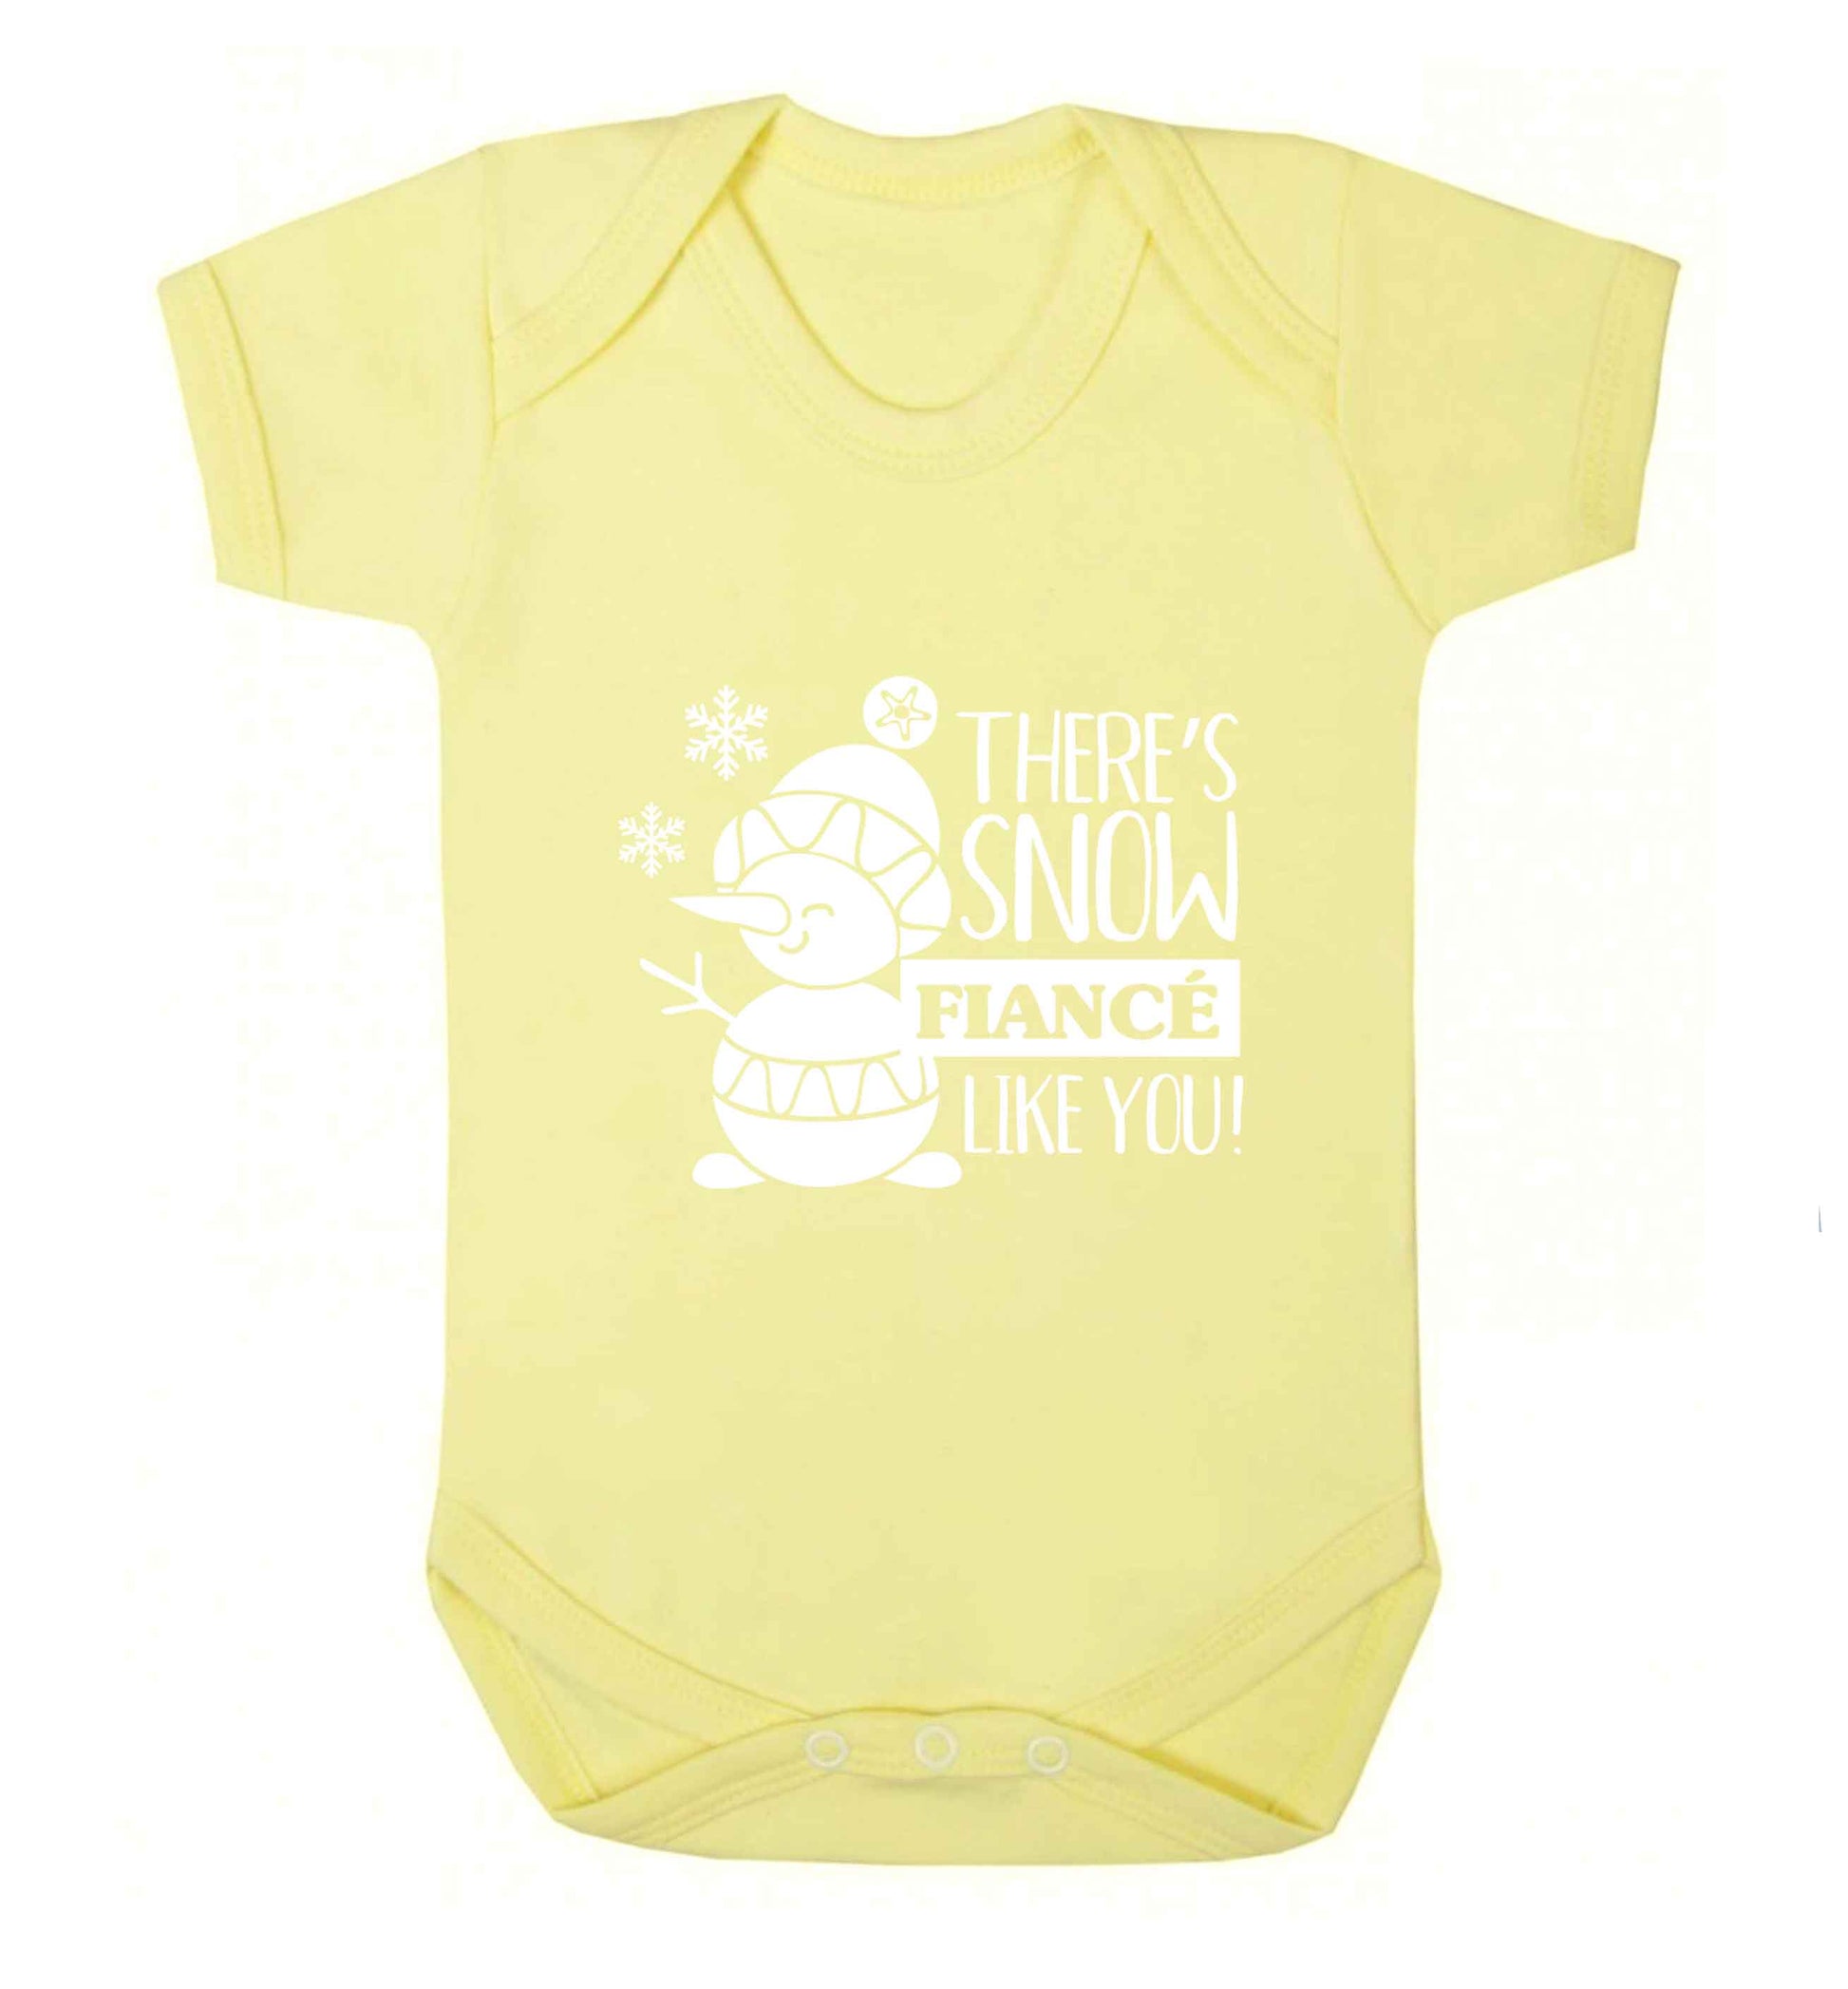 There's snow fiance like you baby vest pale yellow 18-24 months